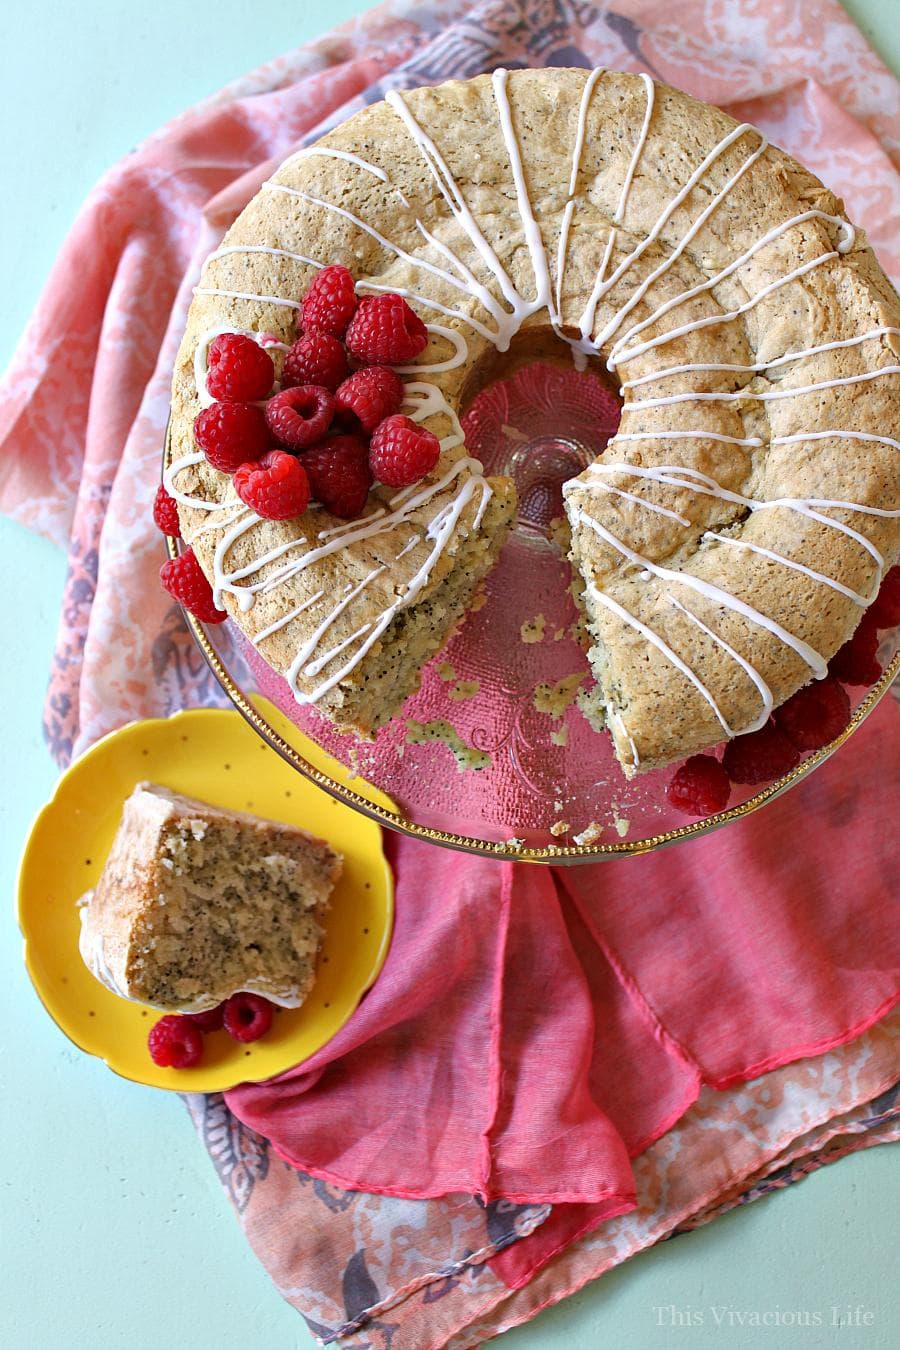 Gluten-free lemon poppy seed bundt cake on cake pan, with a slice cut out and put on a plate. There is a white drizzle glaze and raspberries on top.